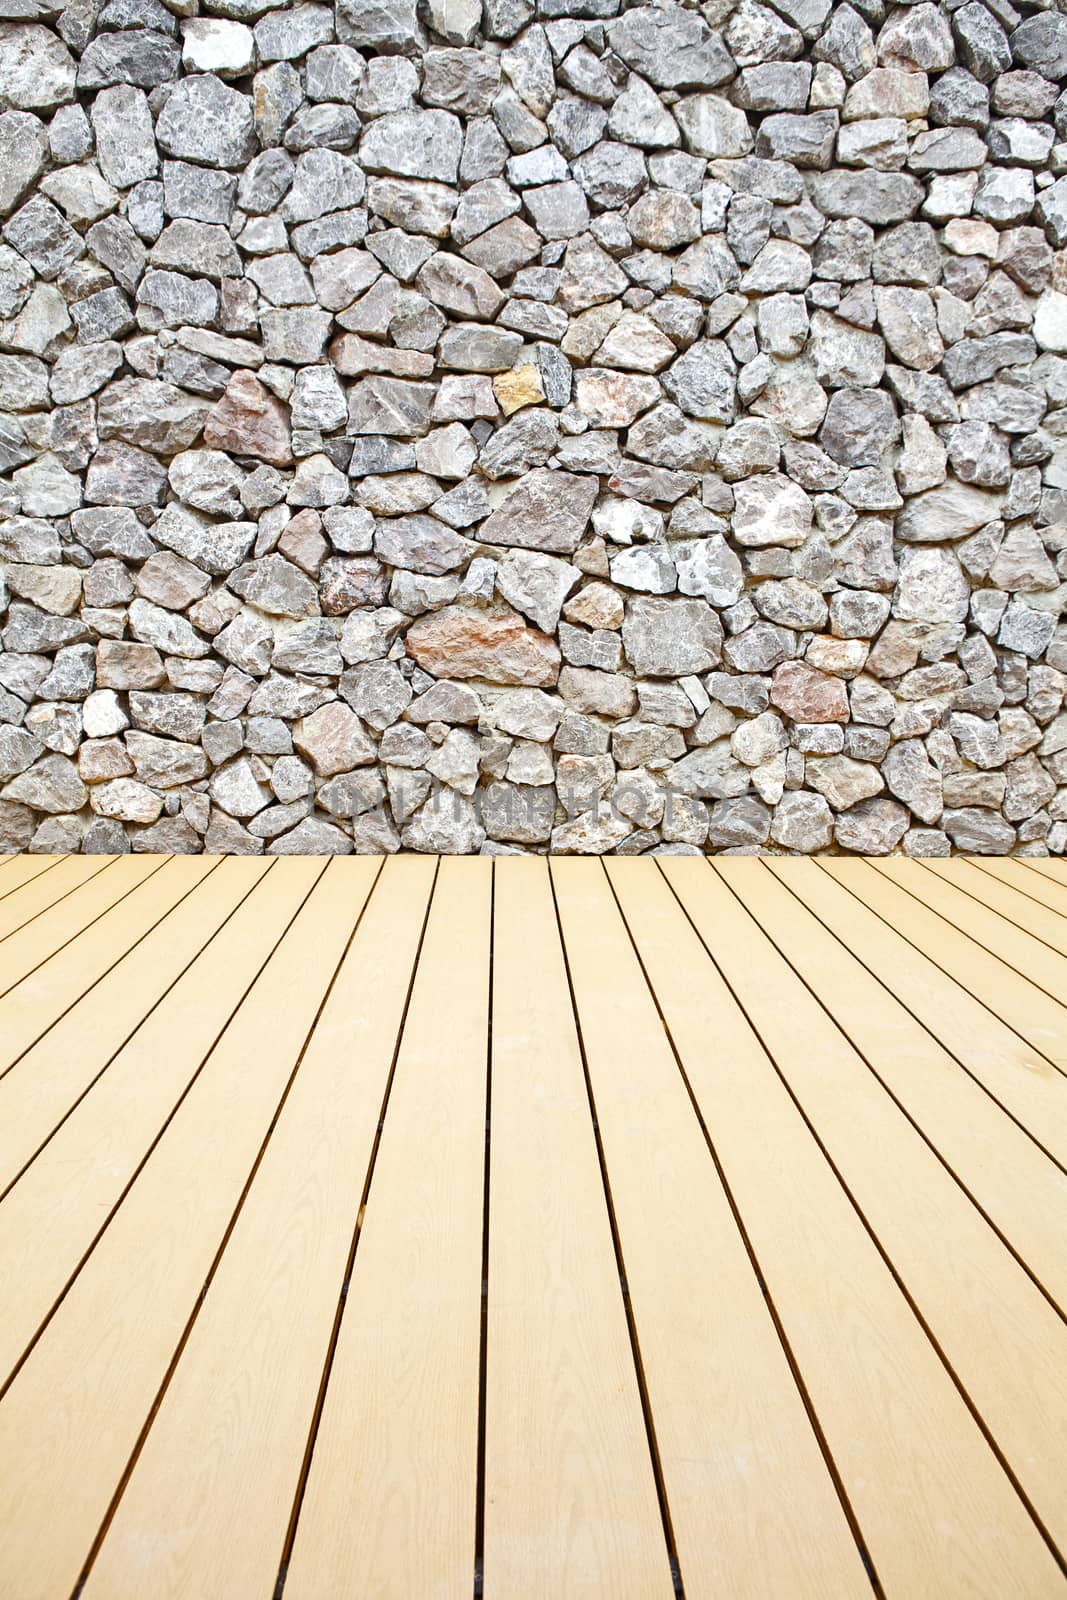 Wooden floor and stone walls background,The rock walls and wooden floor.
